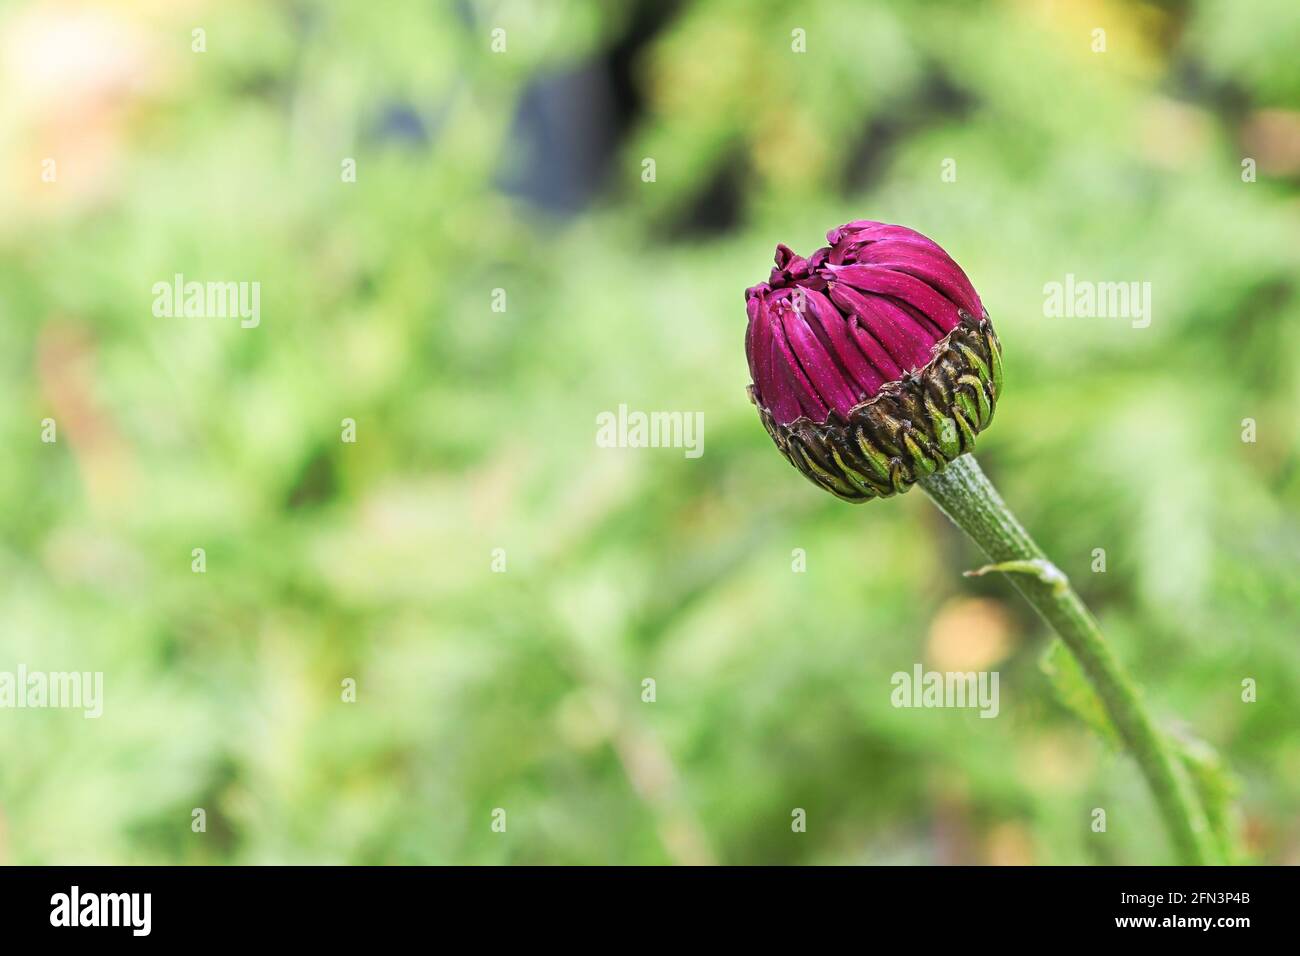 Macro background of a painted daisy flower bud Stock Photo